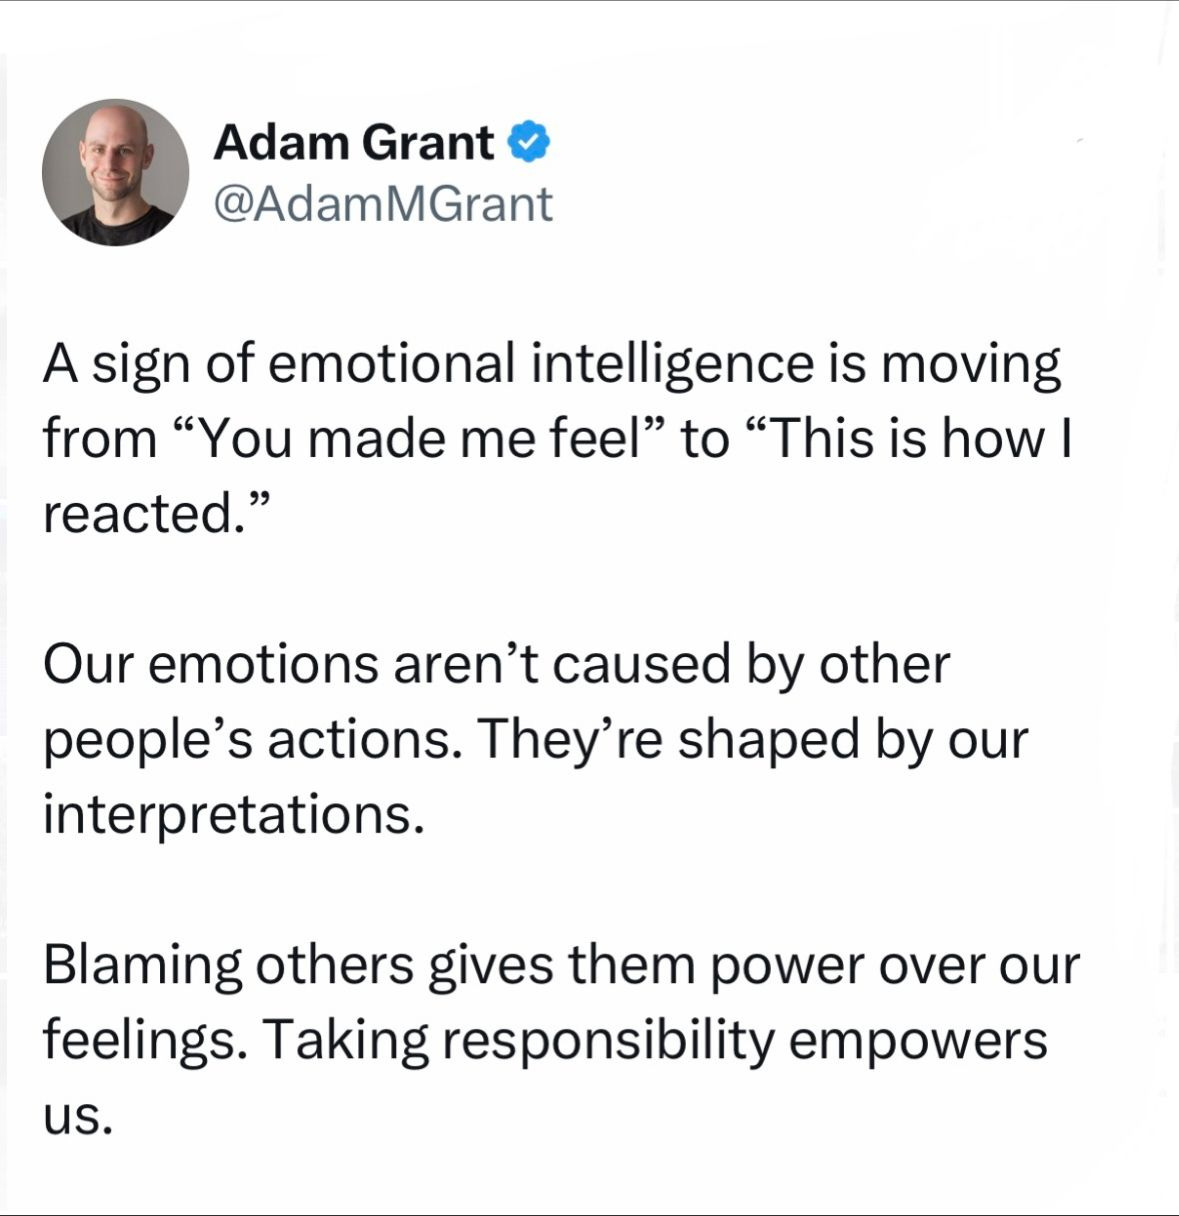 A sign of emotional intelligence is moving from “You made me feel” to “This is how I reacted.”

Our emotions aren’t caused by other people’s actions. They’re shaped by our interpretations.

Blaming others gives them power over our feelings. Taking responsibility empowers us. 